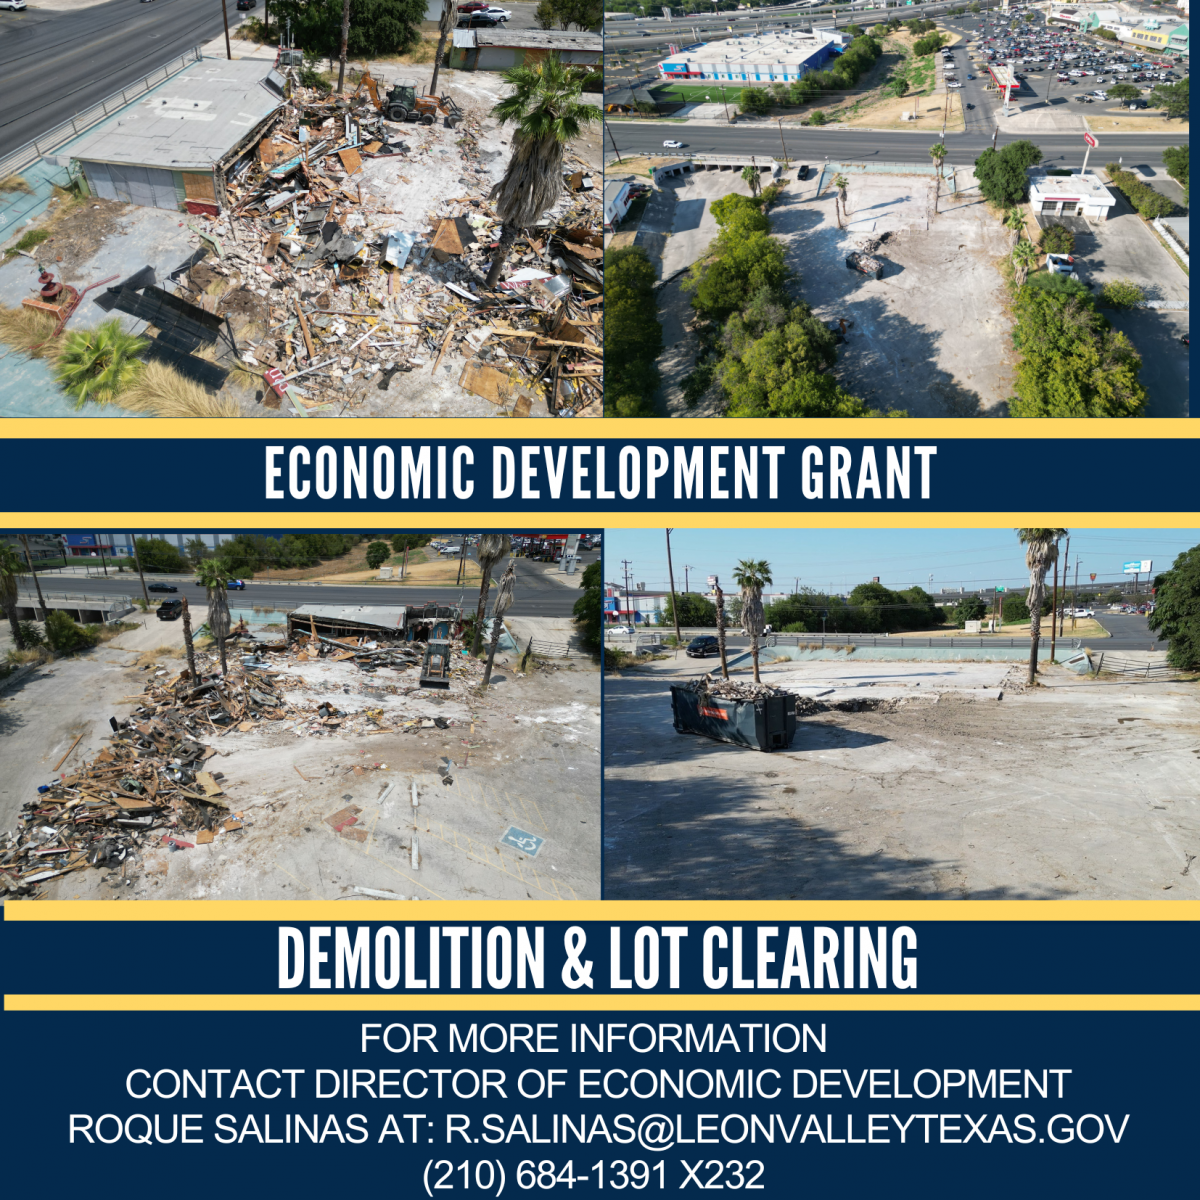 Demo flyer with pictures and information